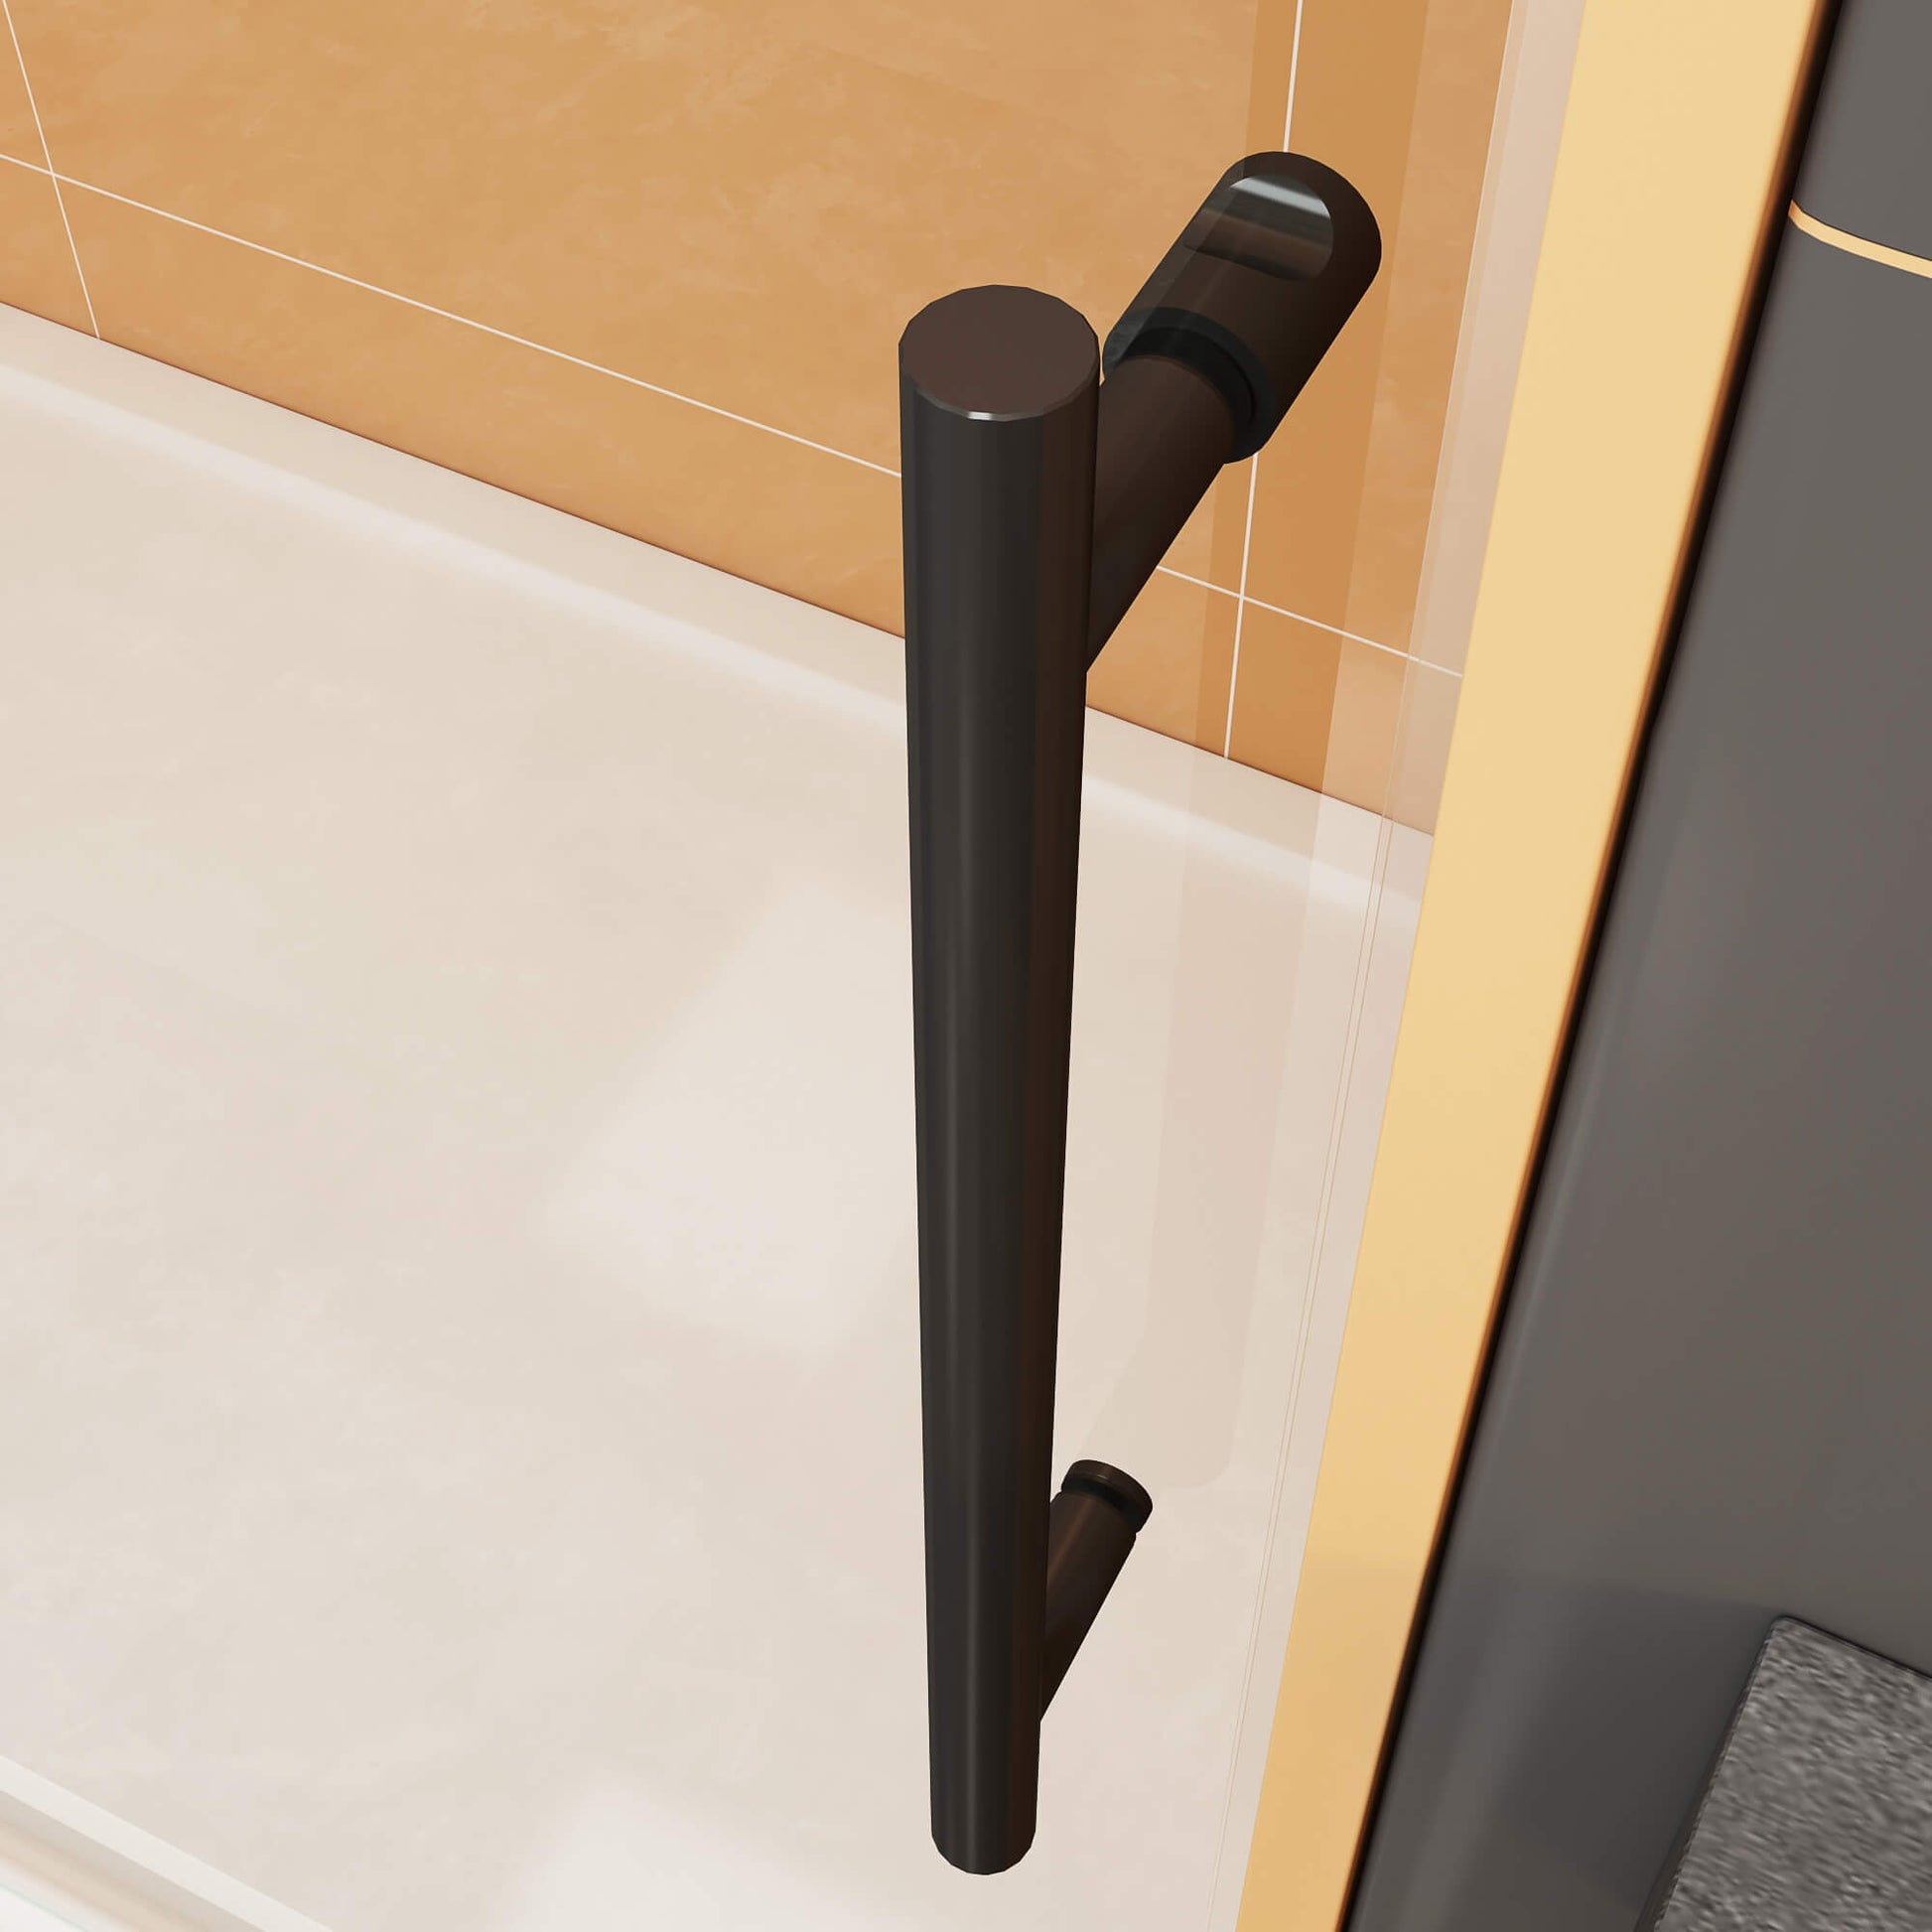 MCOCOD SS12 Soft-Closing Single Sliding Frameless Shower Door with 2 convenient towel bars